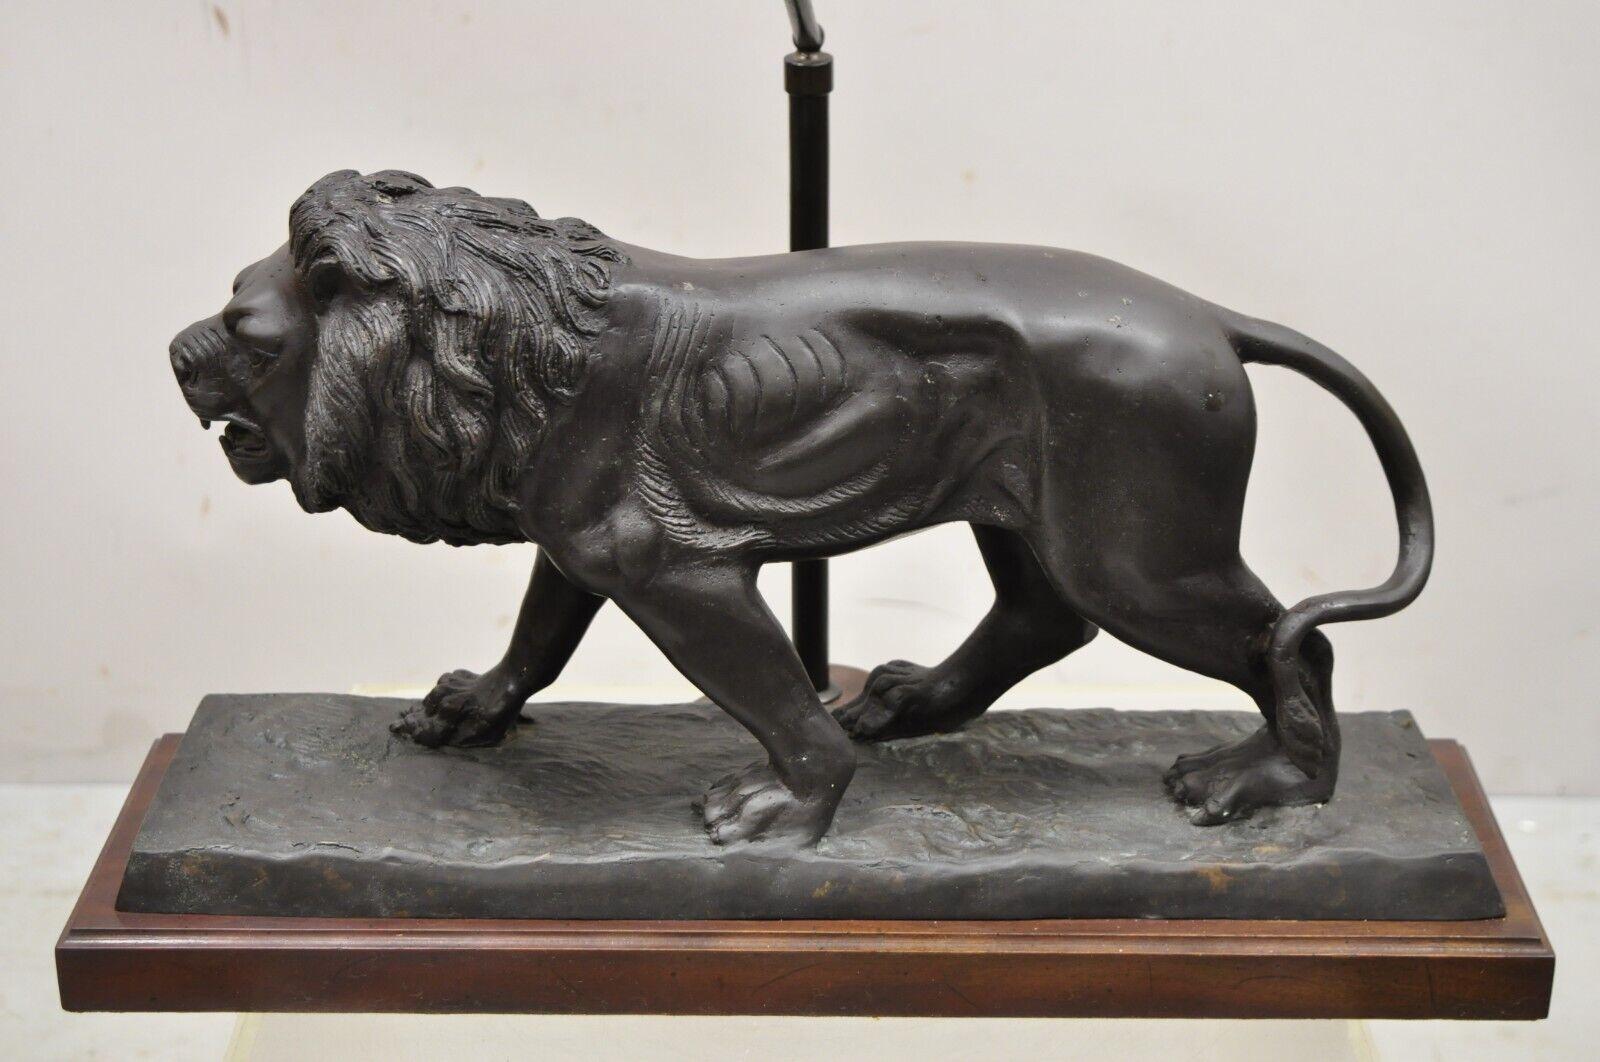 Maitland smith bronze lion table lamp with faux tooled leather shade. Item features original faux tooled leather shade, finely detailed cast bronze lion figure, original label, very nice vintage item, quality craftsmanship, great style and form.